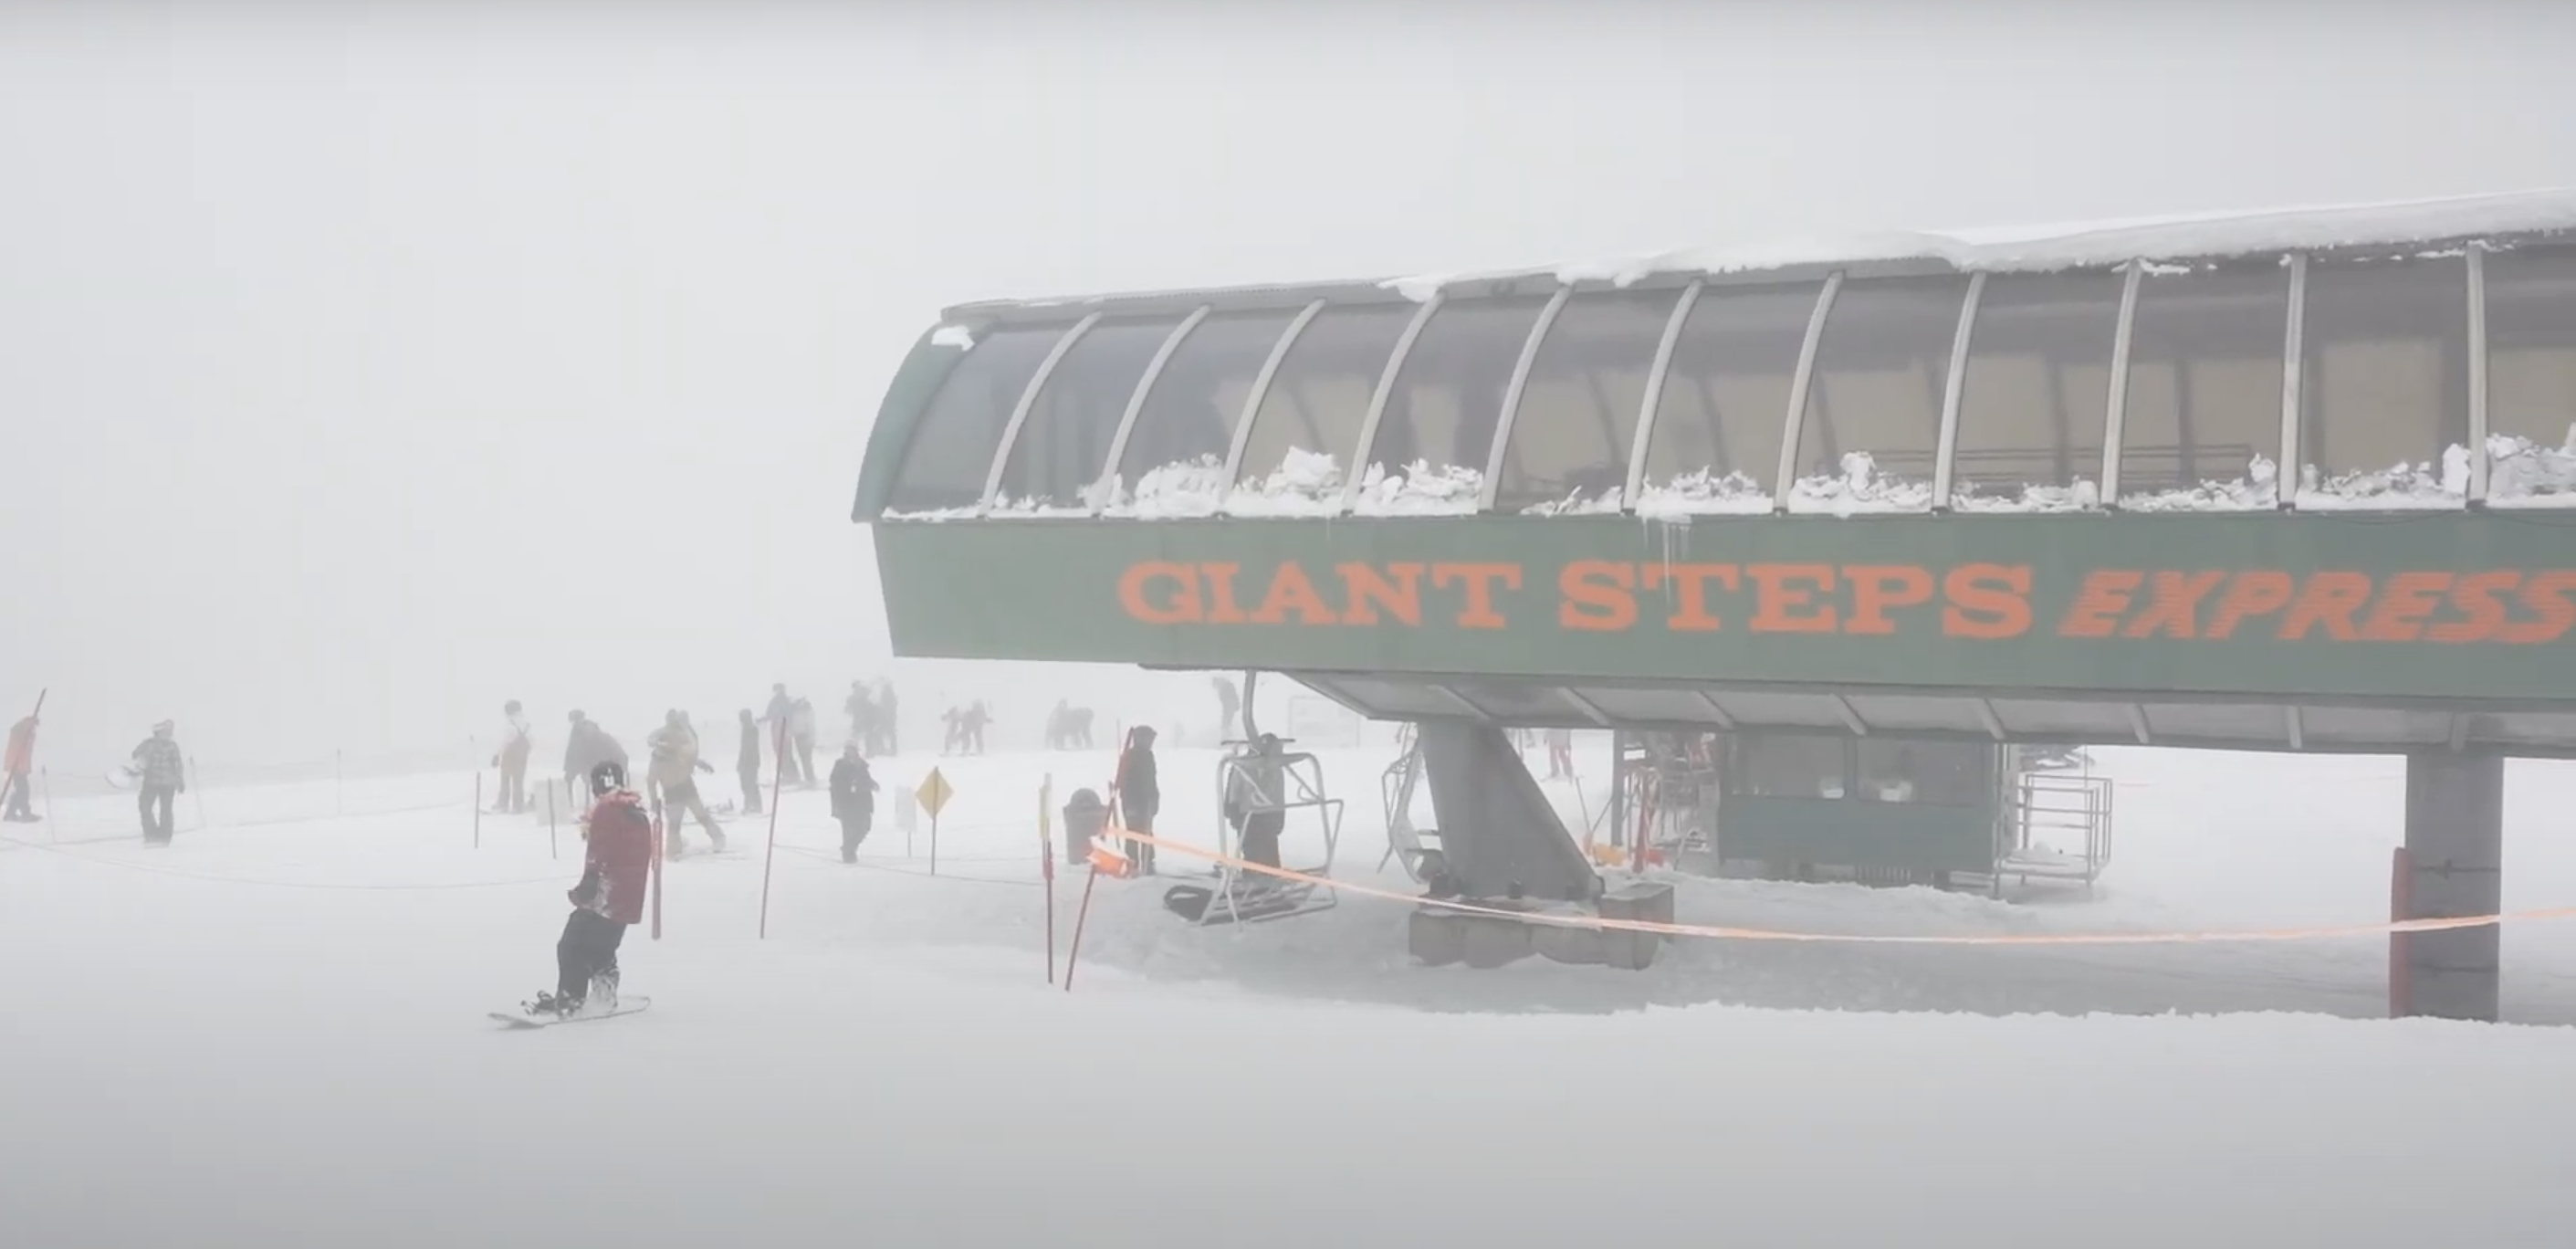 A green and orange ski lift in snowy conditions....